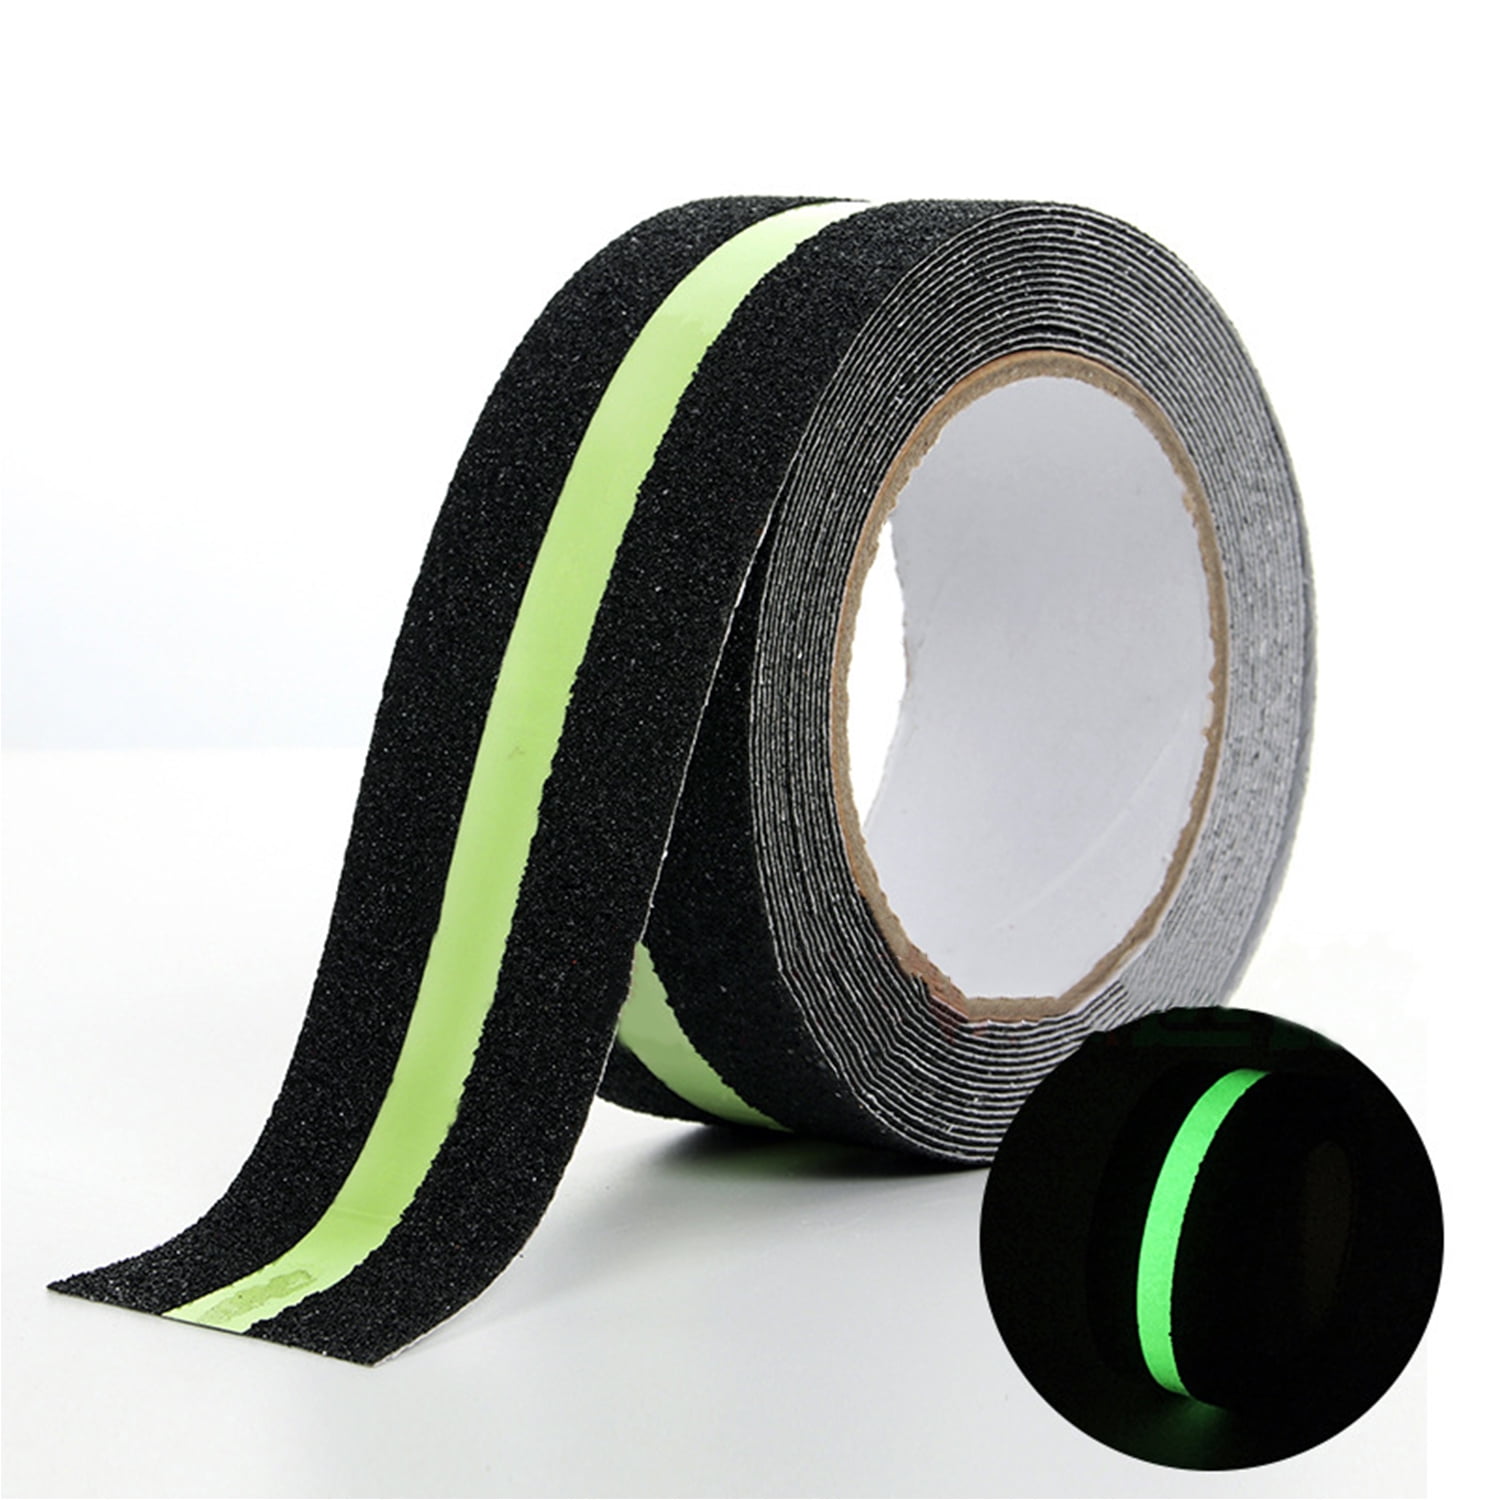 Floor Anti Slip Traction Tape with Glow in Dark Green Stripe 2 X 16 ft Non-Slip Grip Tape Abrasive Adhesive for Indoor Outdoor Stairs Steps 